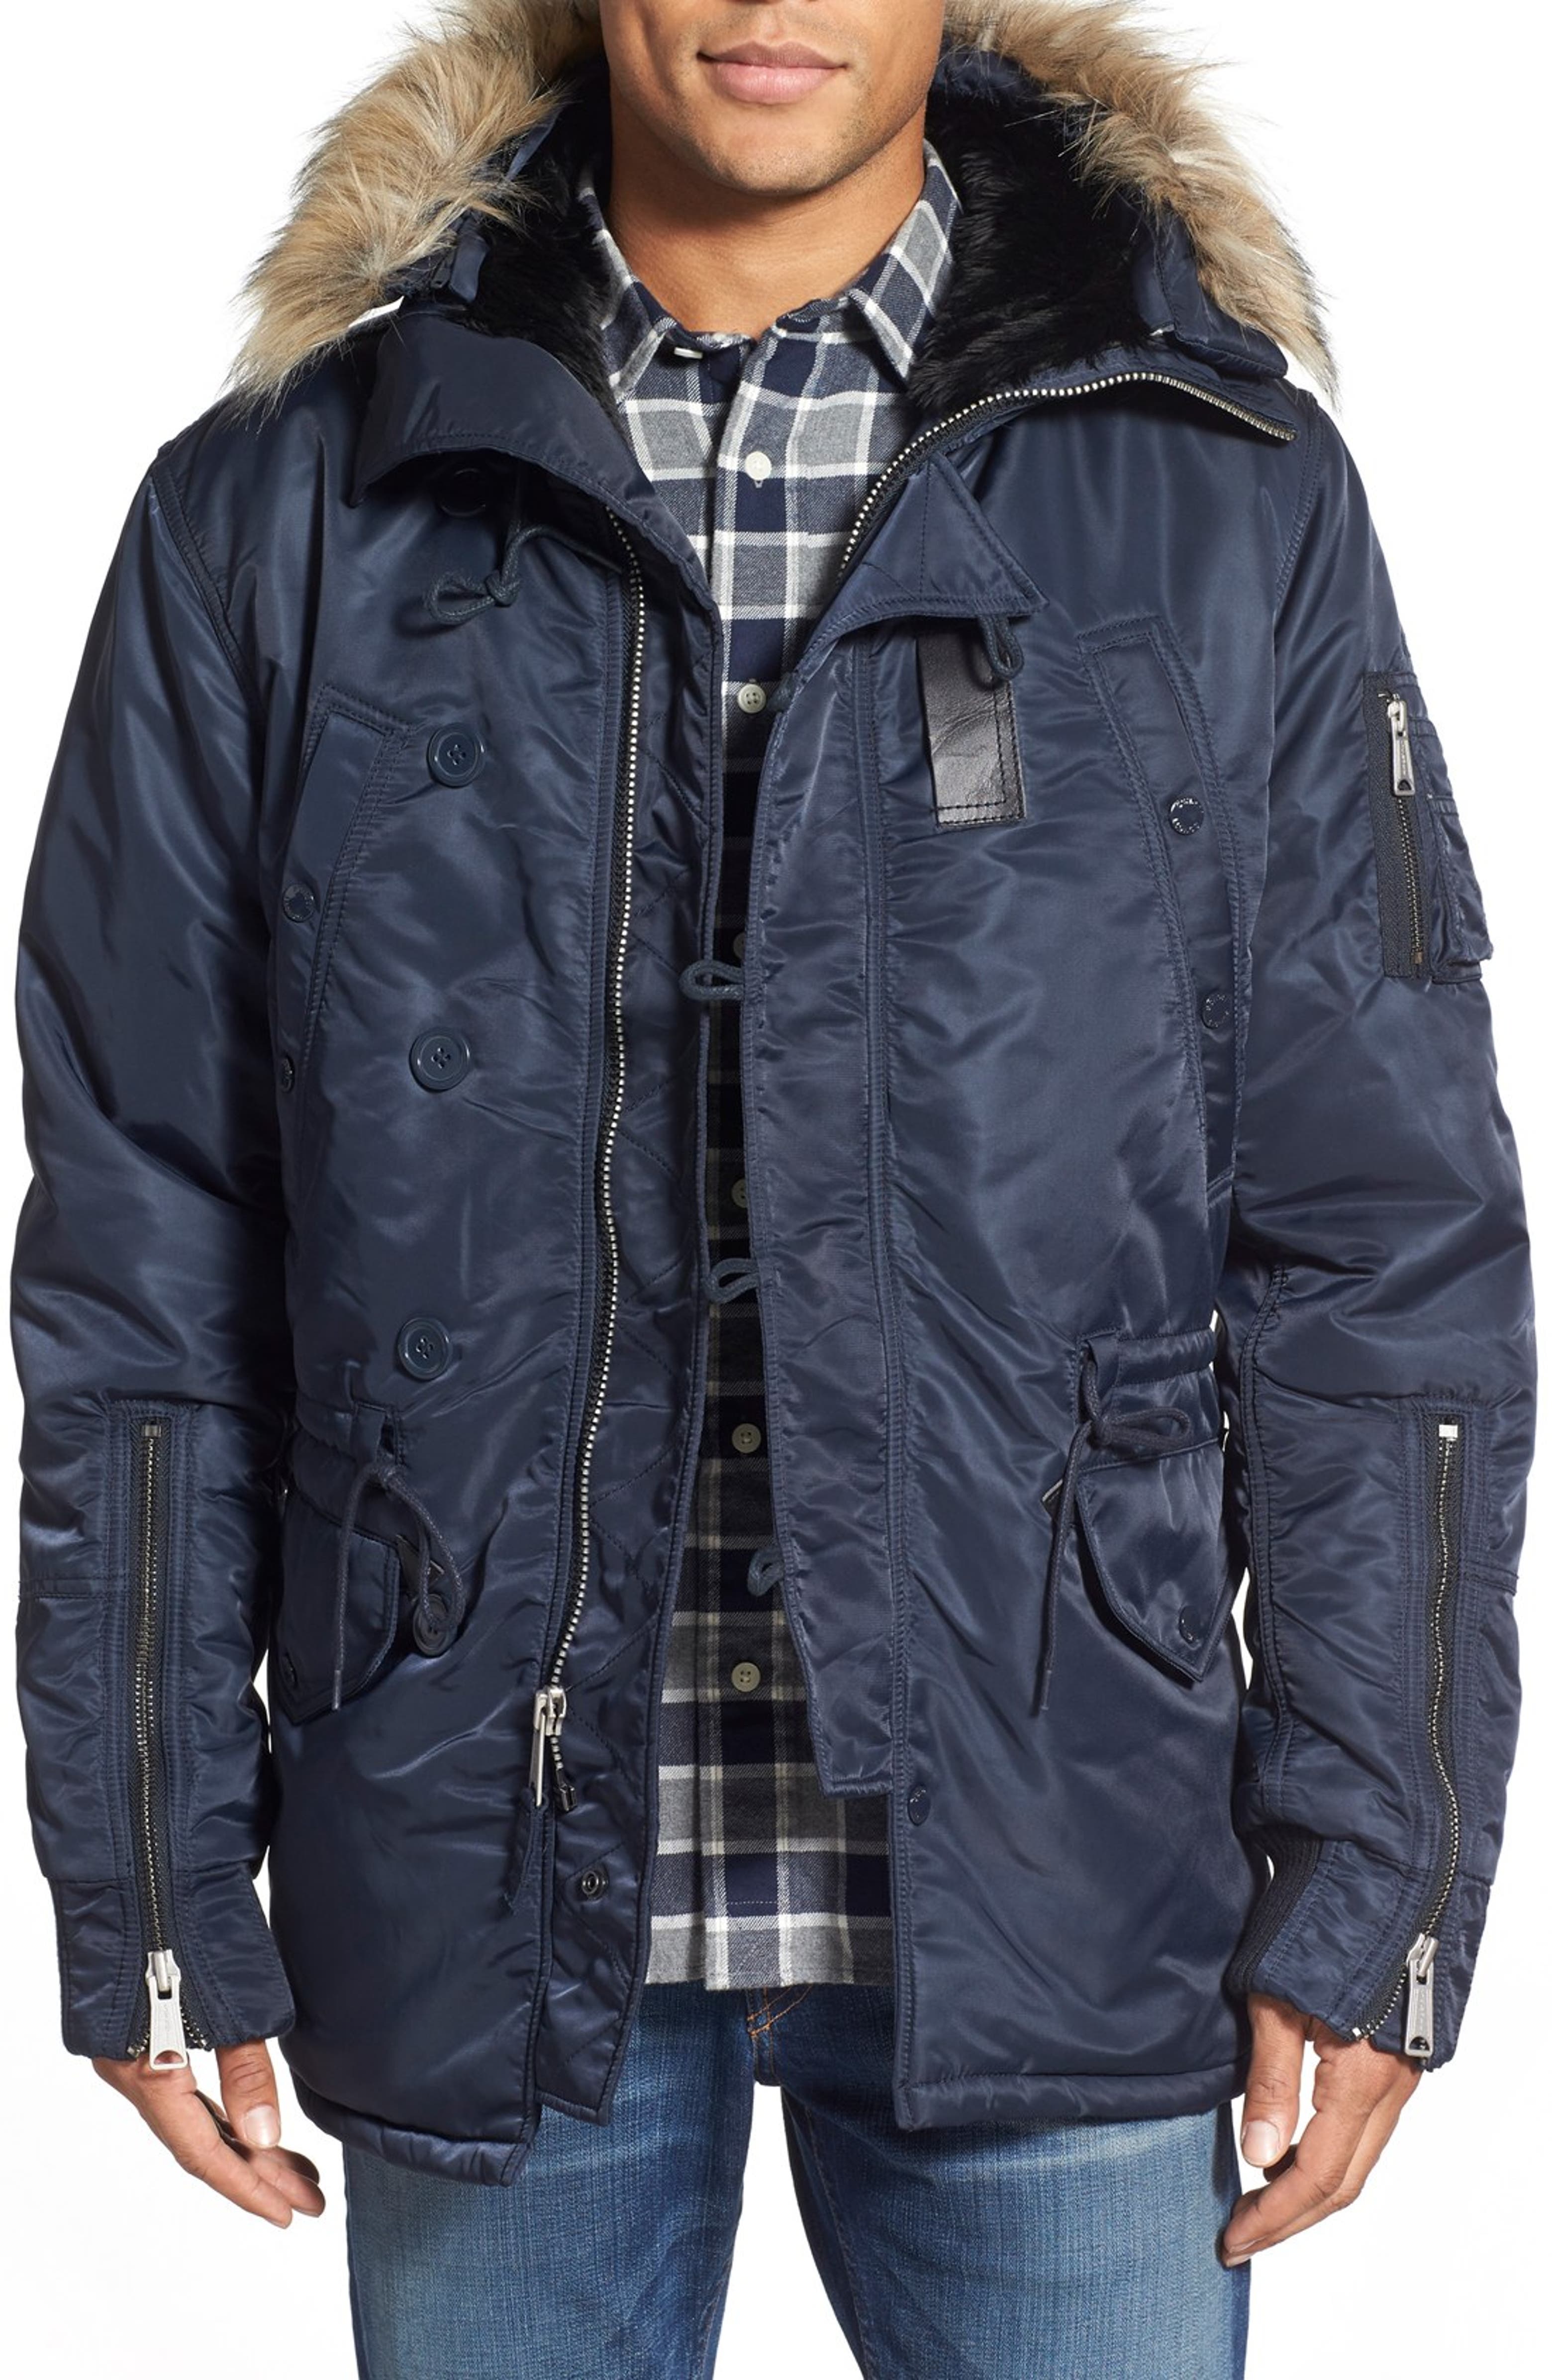 Schott NYC 'N-4B' Hooded Parka with Faux Fur Trim | Nordstrom